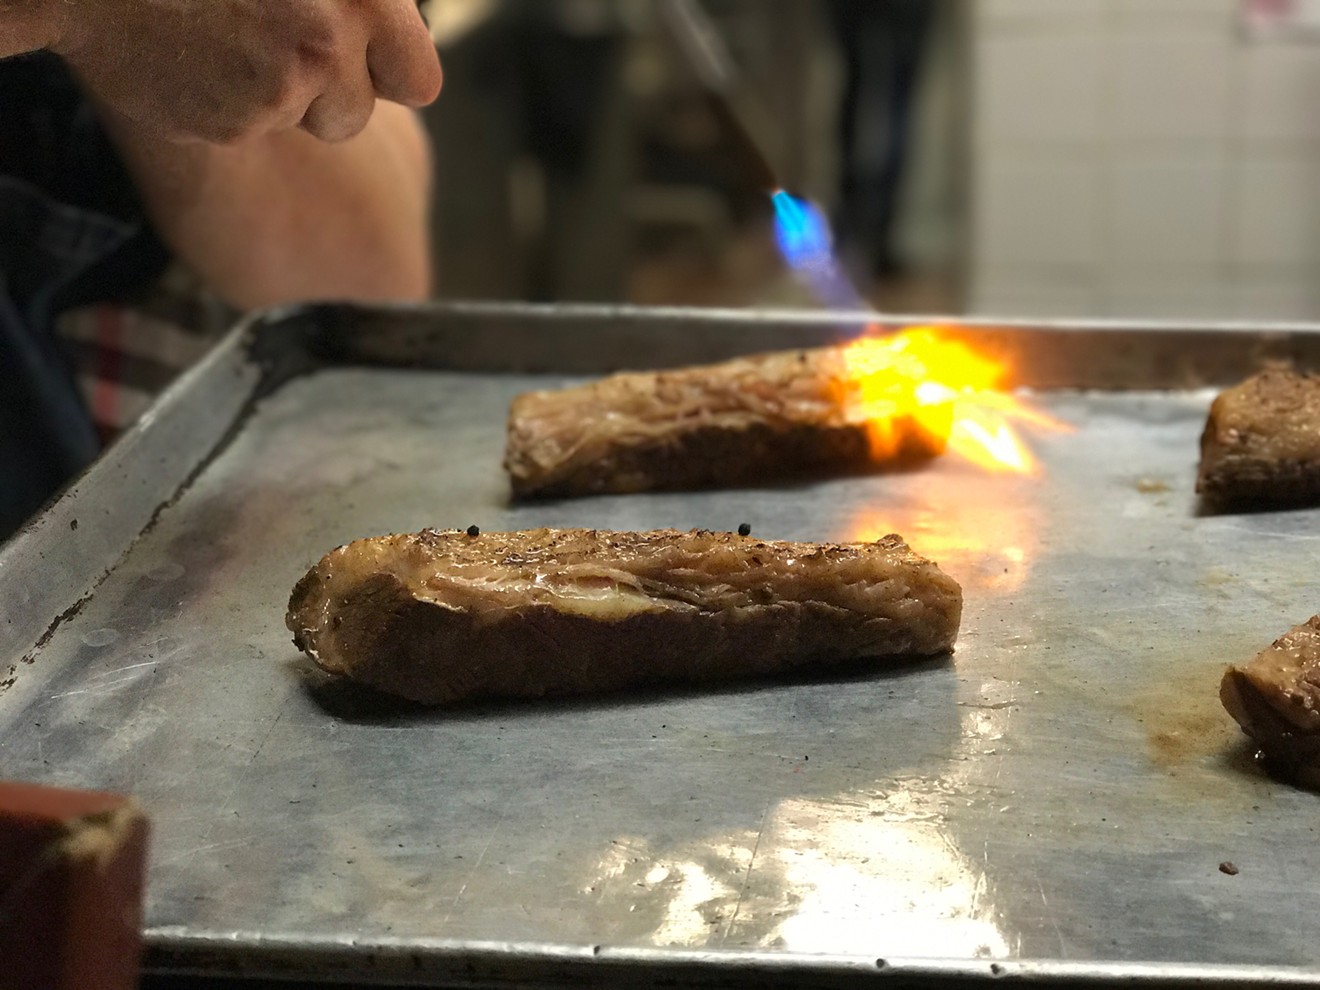 Chef David Anthony Temple uses a torch to sear sous vide Kobe beef that's been spritzed with a tincture made of Everclear and White Widow, a strain of marijuana, at an underground cannabis dinner recently held in Dallas.